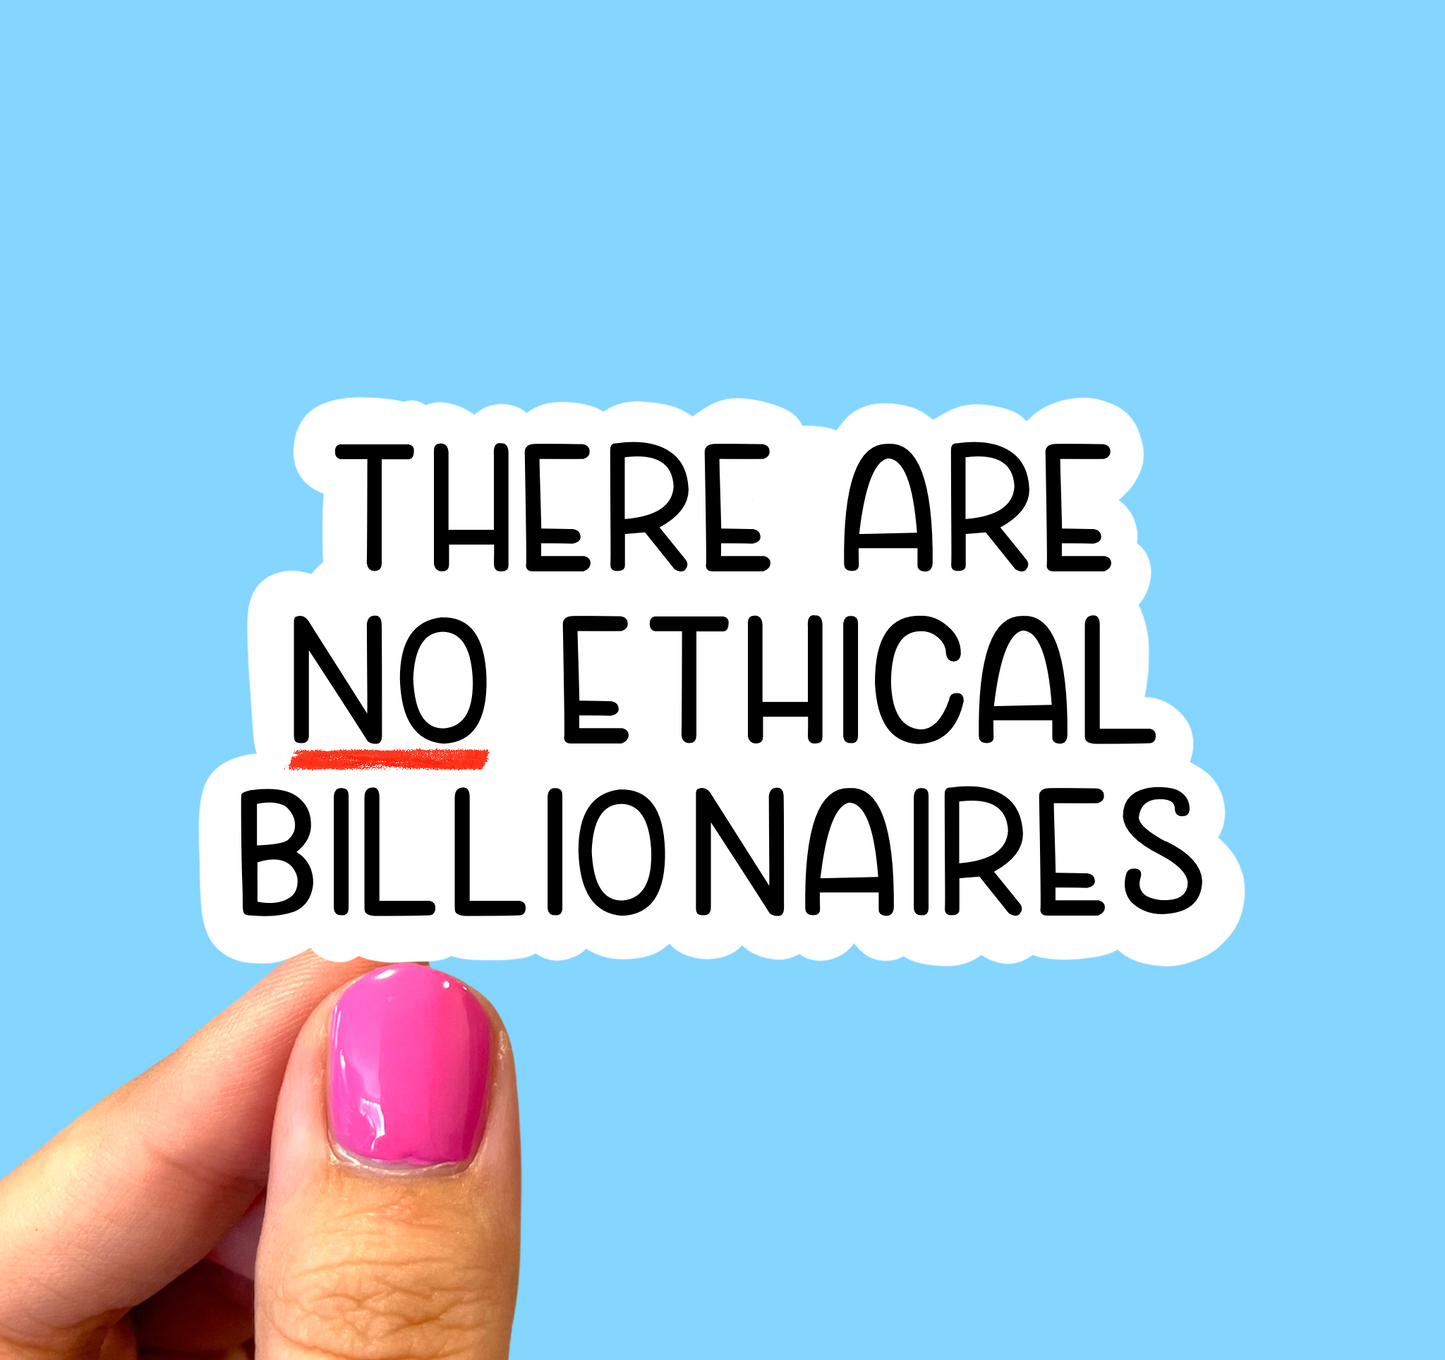 There are no ethical billionaires